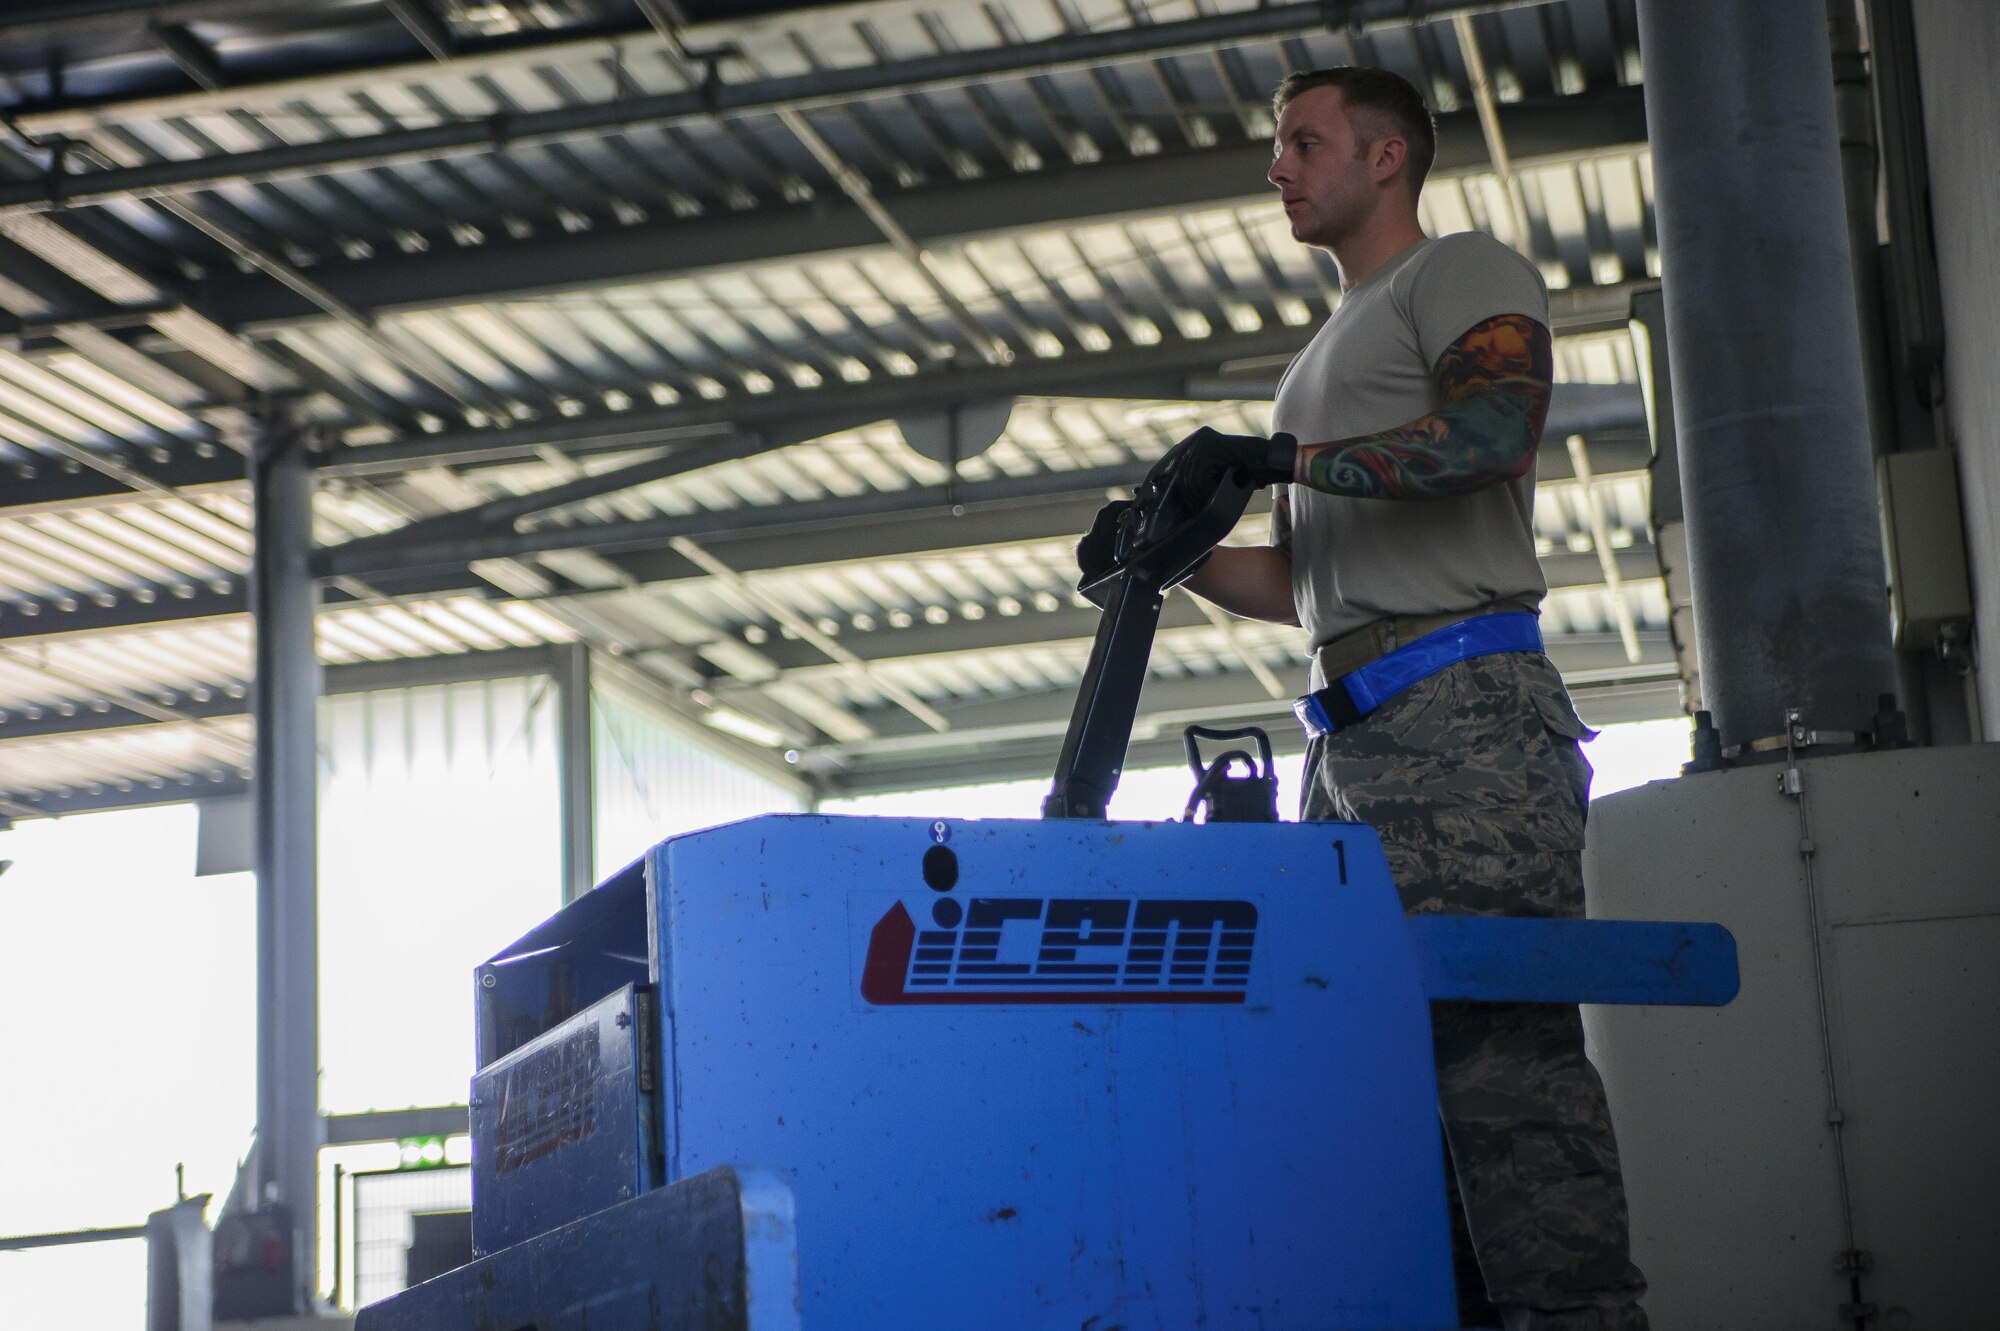 Tech. Sgt. William Anderson, an Airman from the 81st Aerial Port Squadron, Joint Base Charleston, loads a pallet of hazardous cargo on a weigh-station in the special handling section at Ramstein Air Base, Germany, July 19, 2017.  Anderson, along with fellow Airmen from the 81st APS, completed annual tour training requirements while in Germany.
  (U.S. Air Force photo by Senior Airman Jonathan Lane)